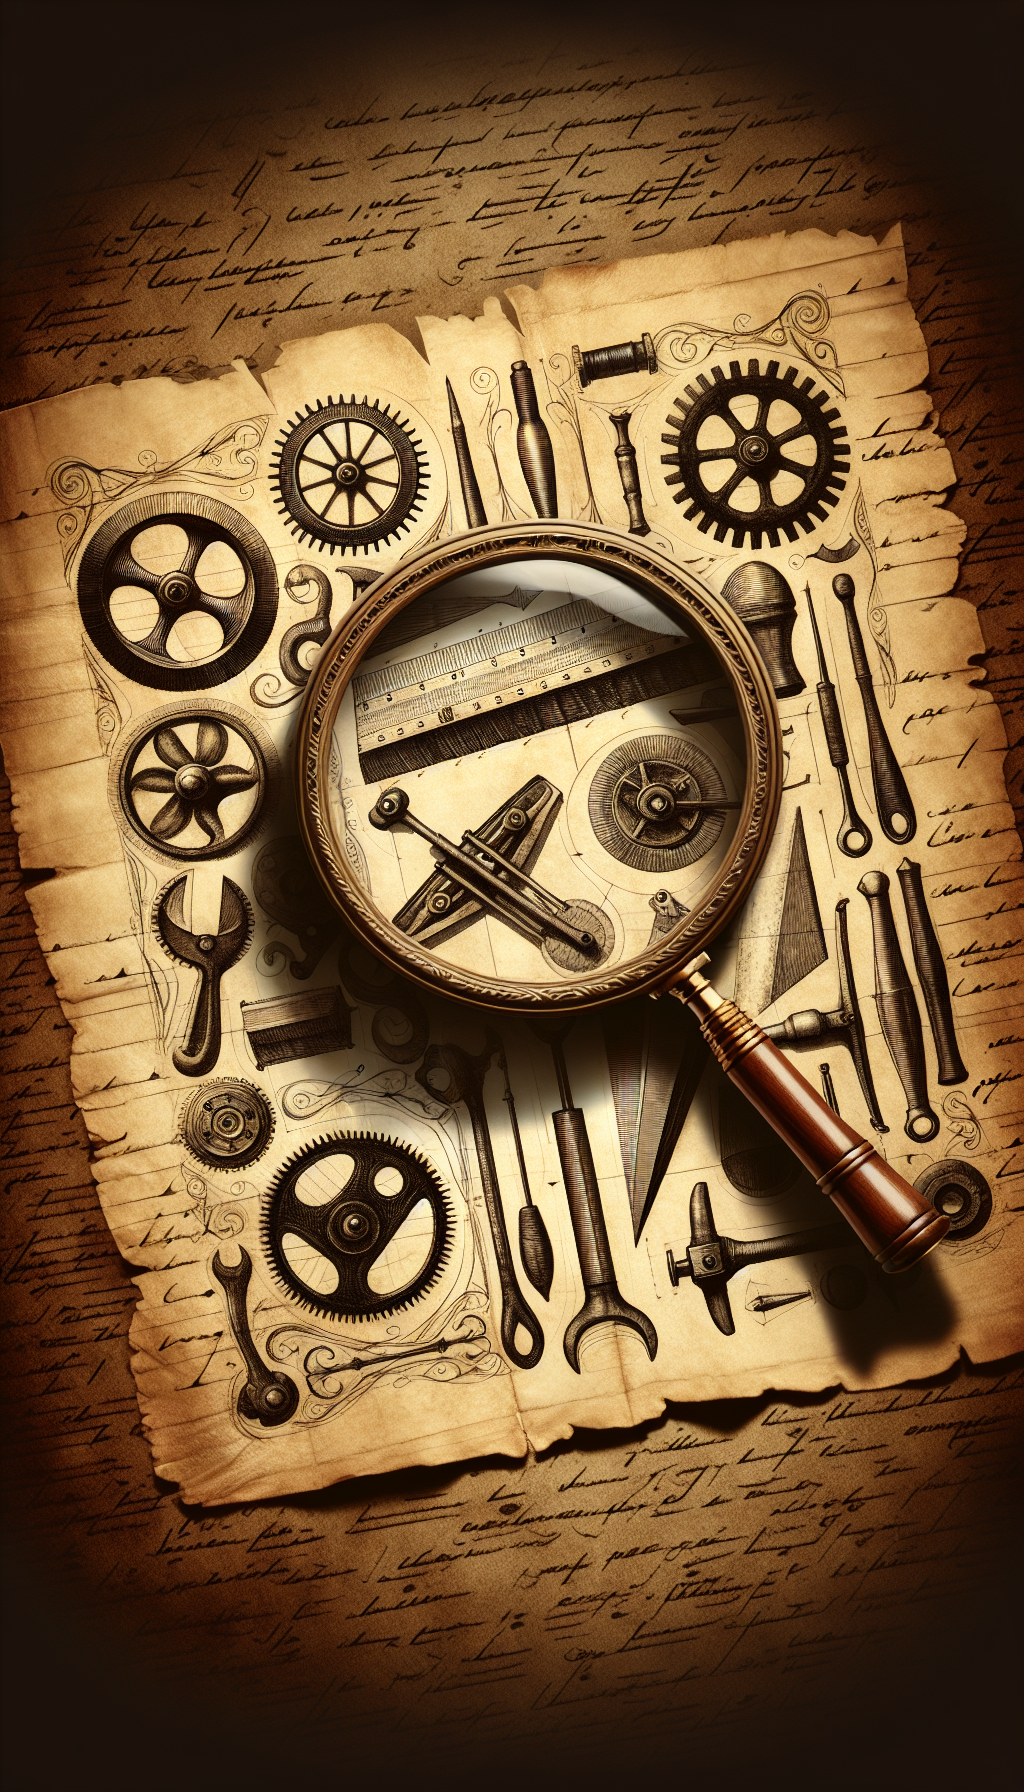 A vintage magnifying glass held over a sepia-toned parchment filled with faded sketches of enigmatic antique tools, their purposes labeled in elegant, looping script. Shadows hint at 3D silhouettes of gears, hammers, and planes, each morphing restlessly, encapsulating the mystery of their origins. The glass reveals a hidden ink splash, hinting at an incomplete discovery in an evolving detective scene.